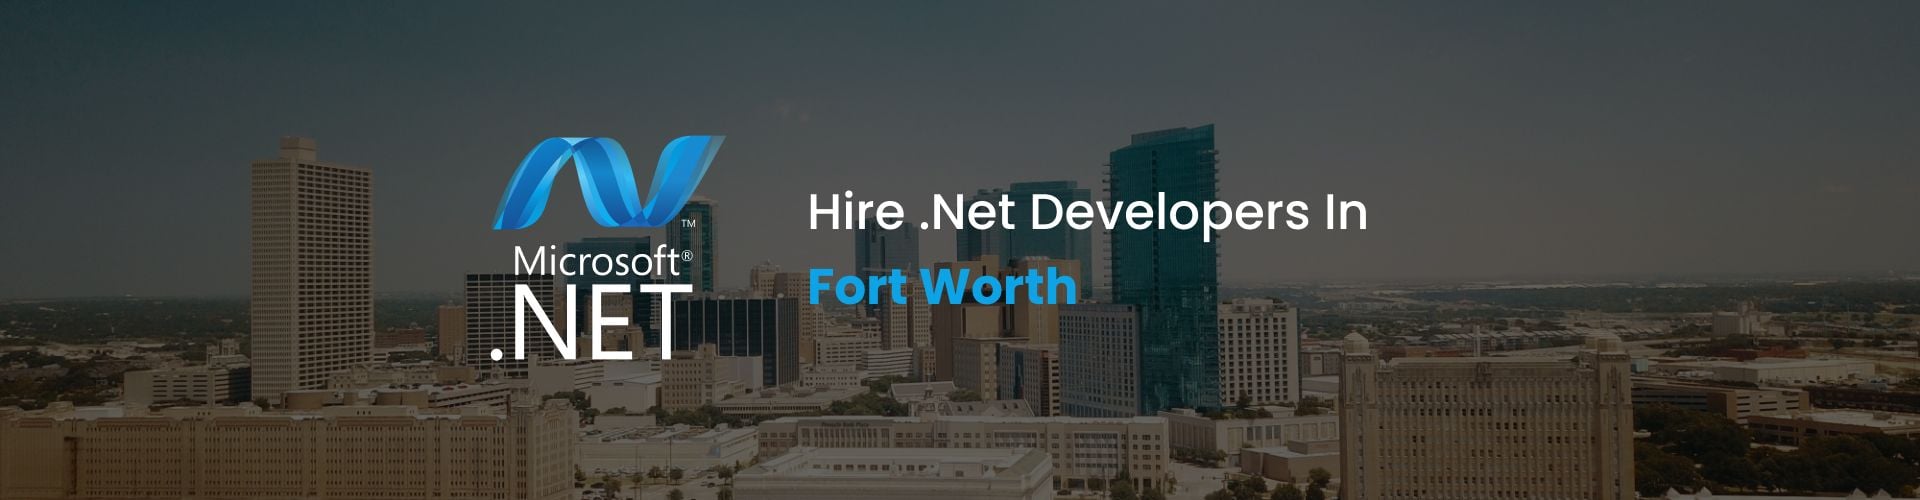 hire .net developers in fort worth